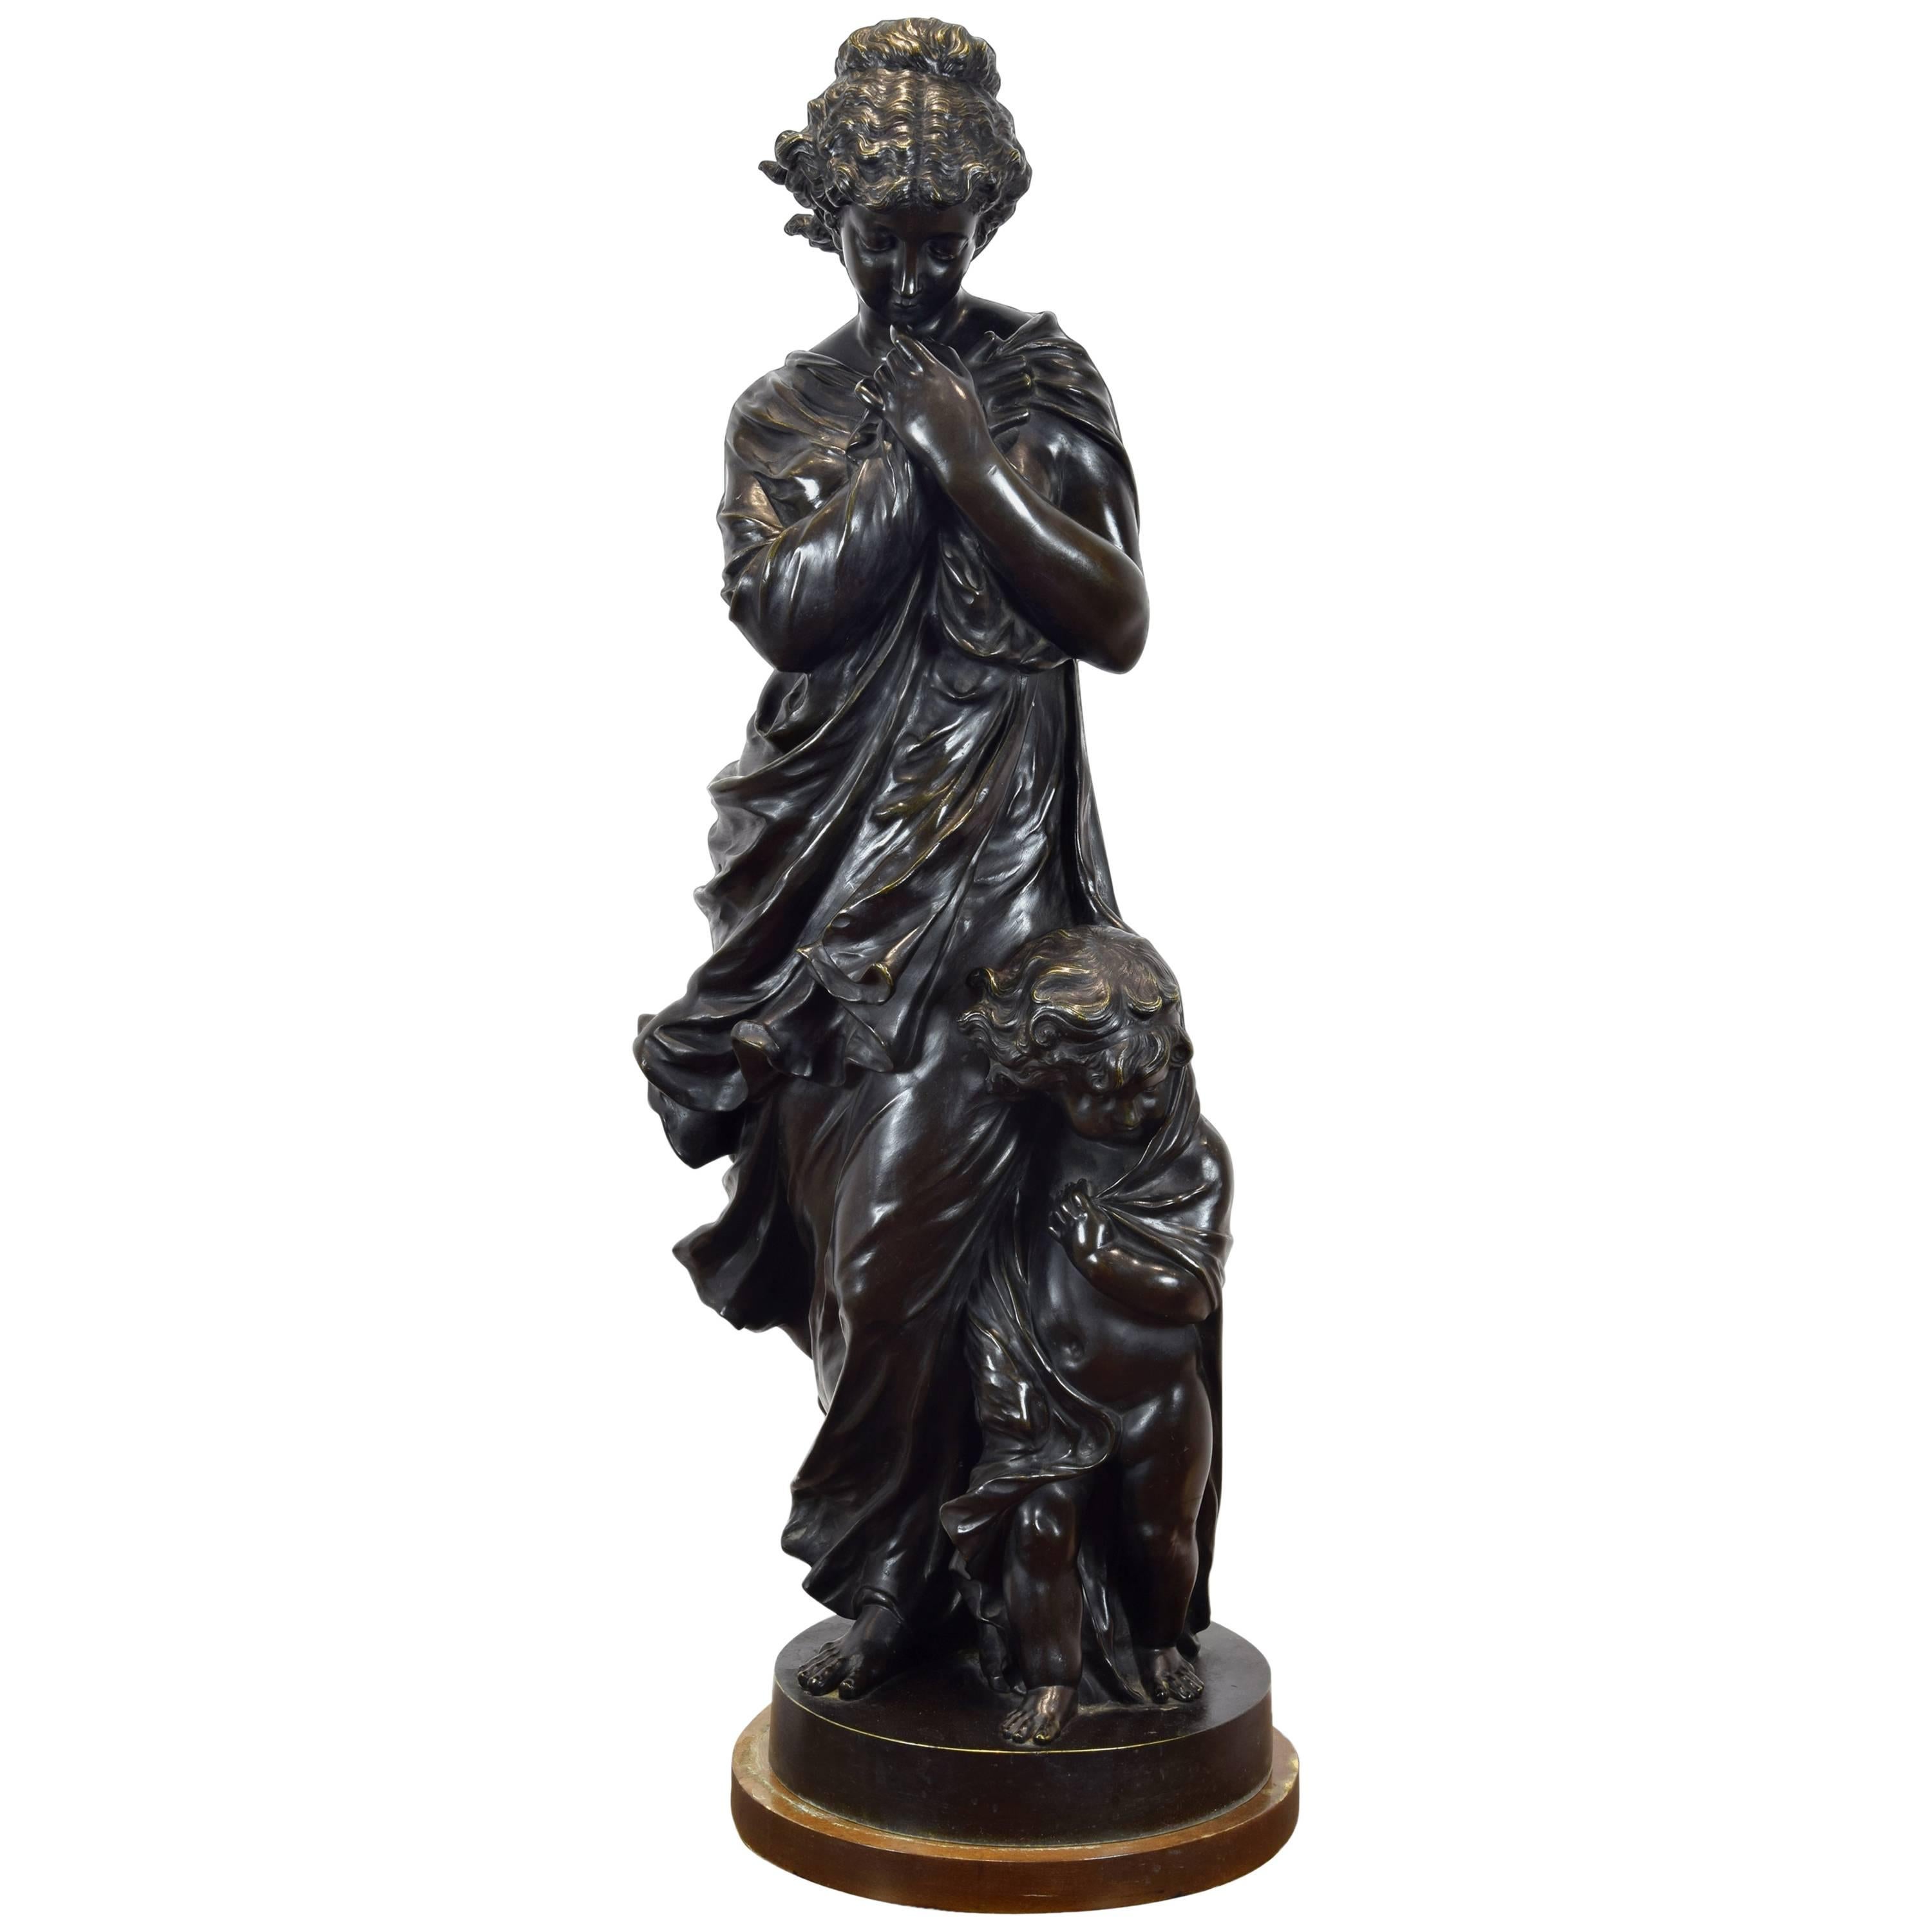 "Allegory of the Winter", Bronze, Étienne Alexandre, France, 19th Century